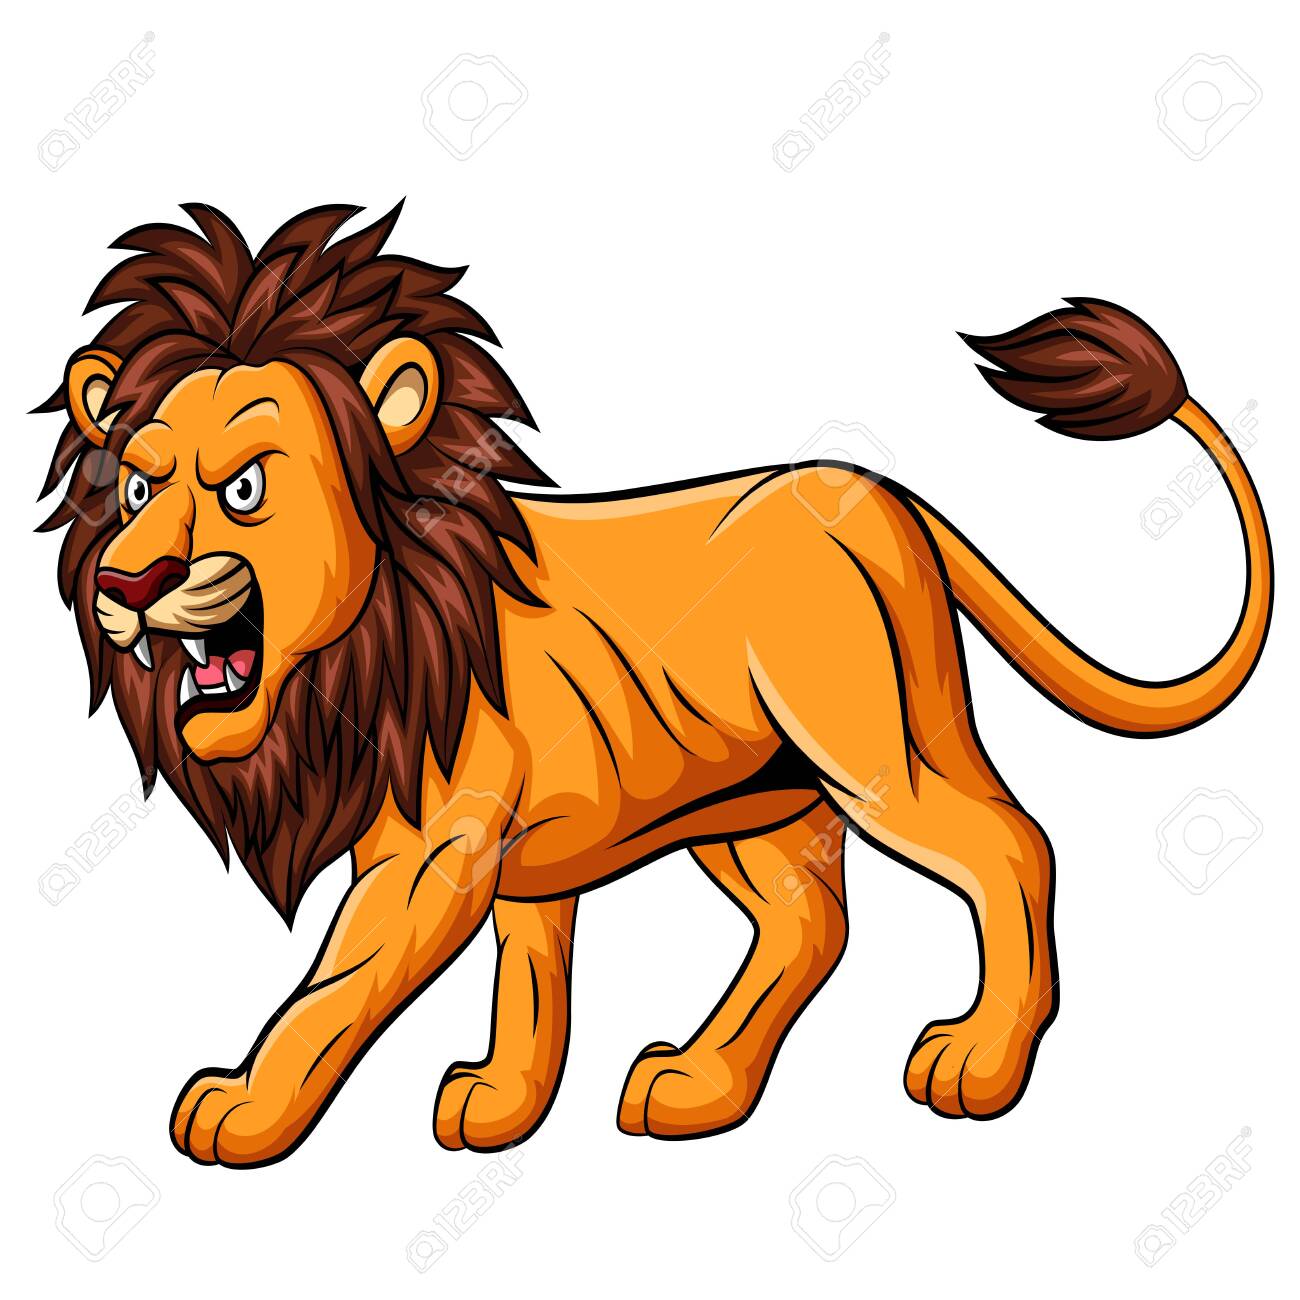 Free download Cartoon Roaring Lion Mascot On White Background Royalty ...